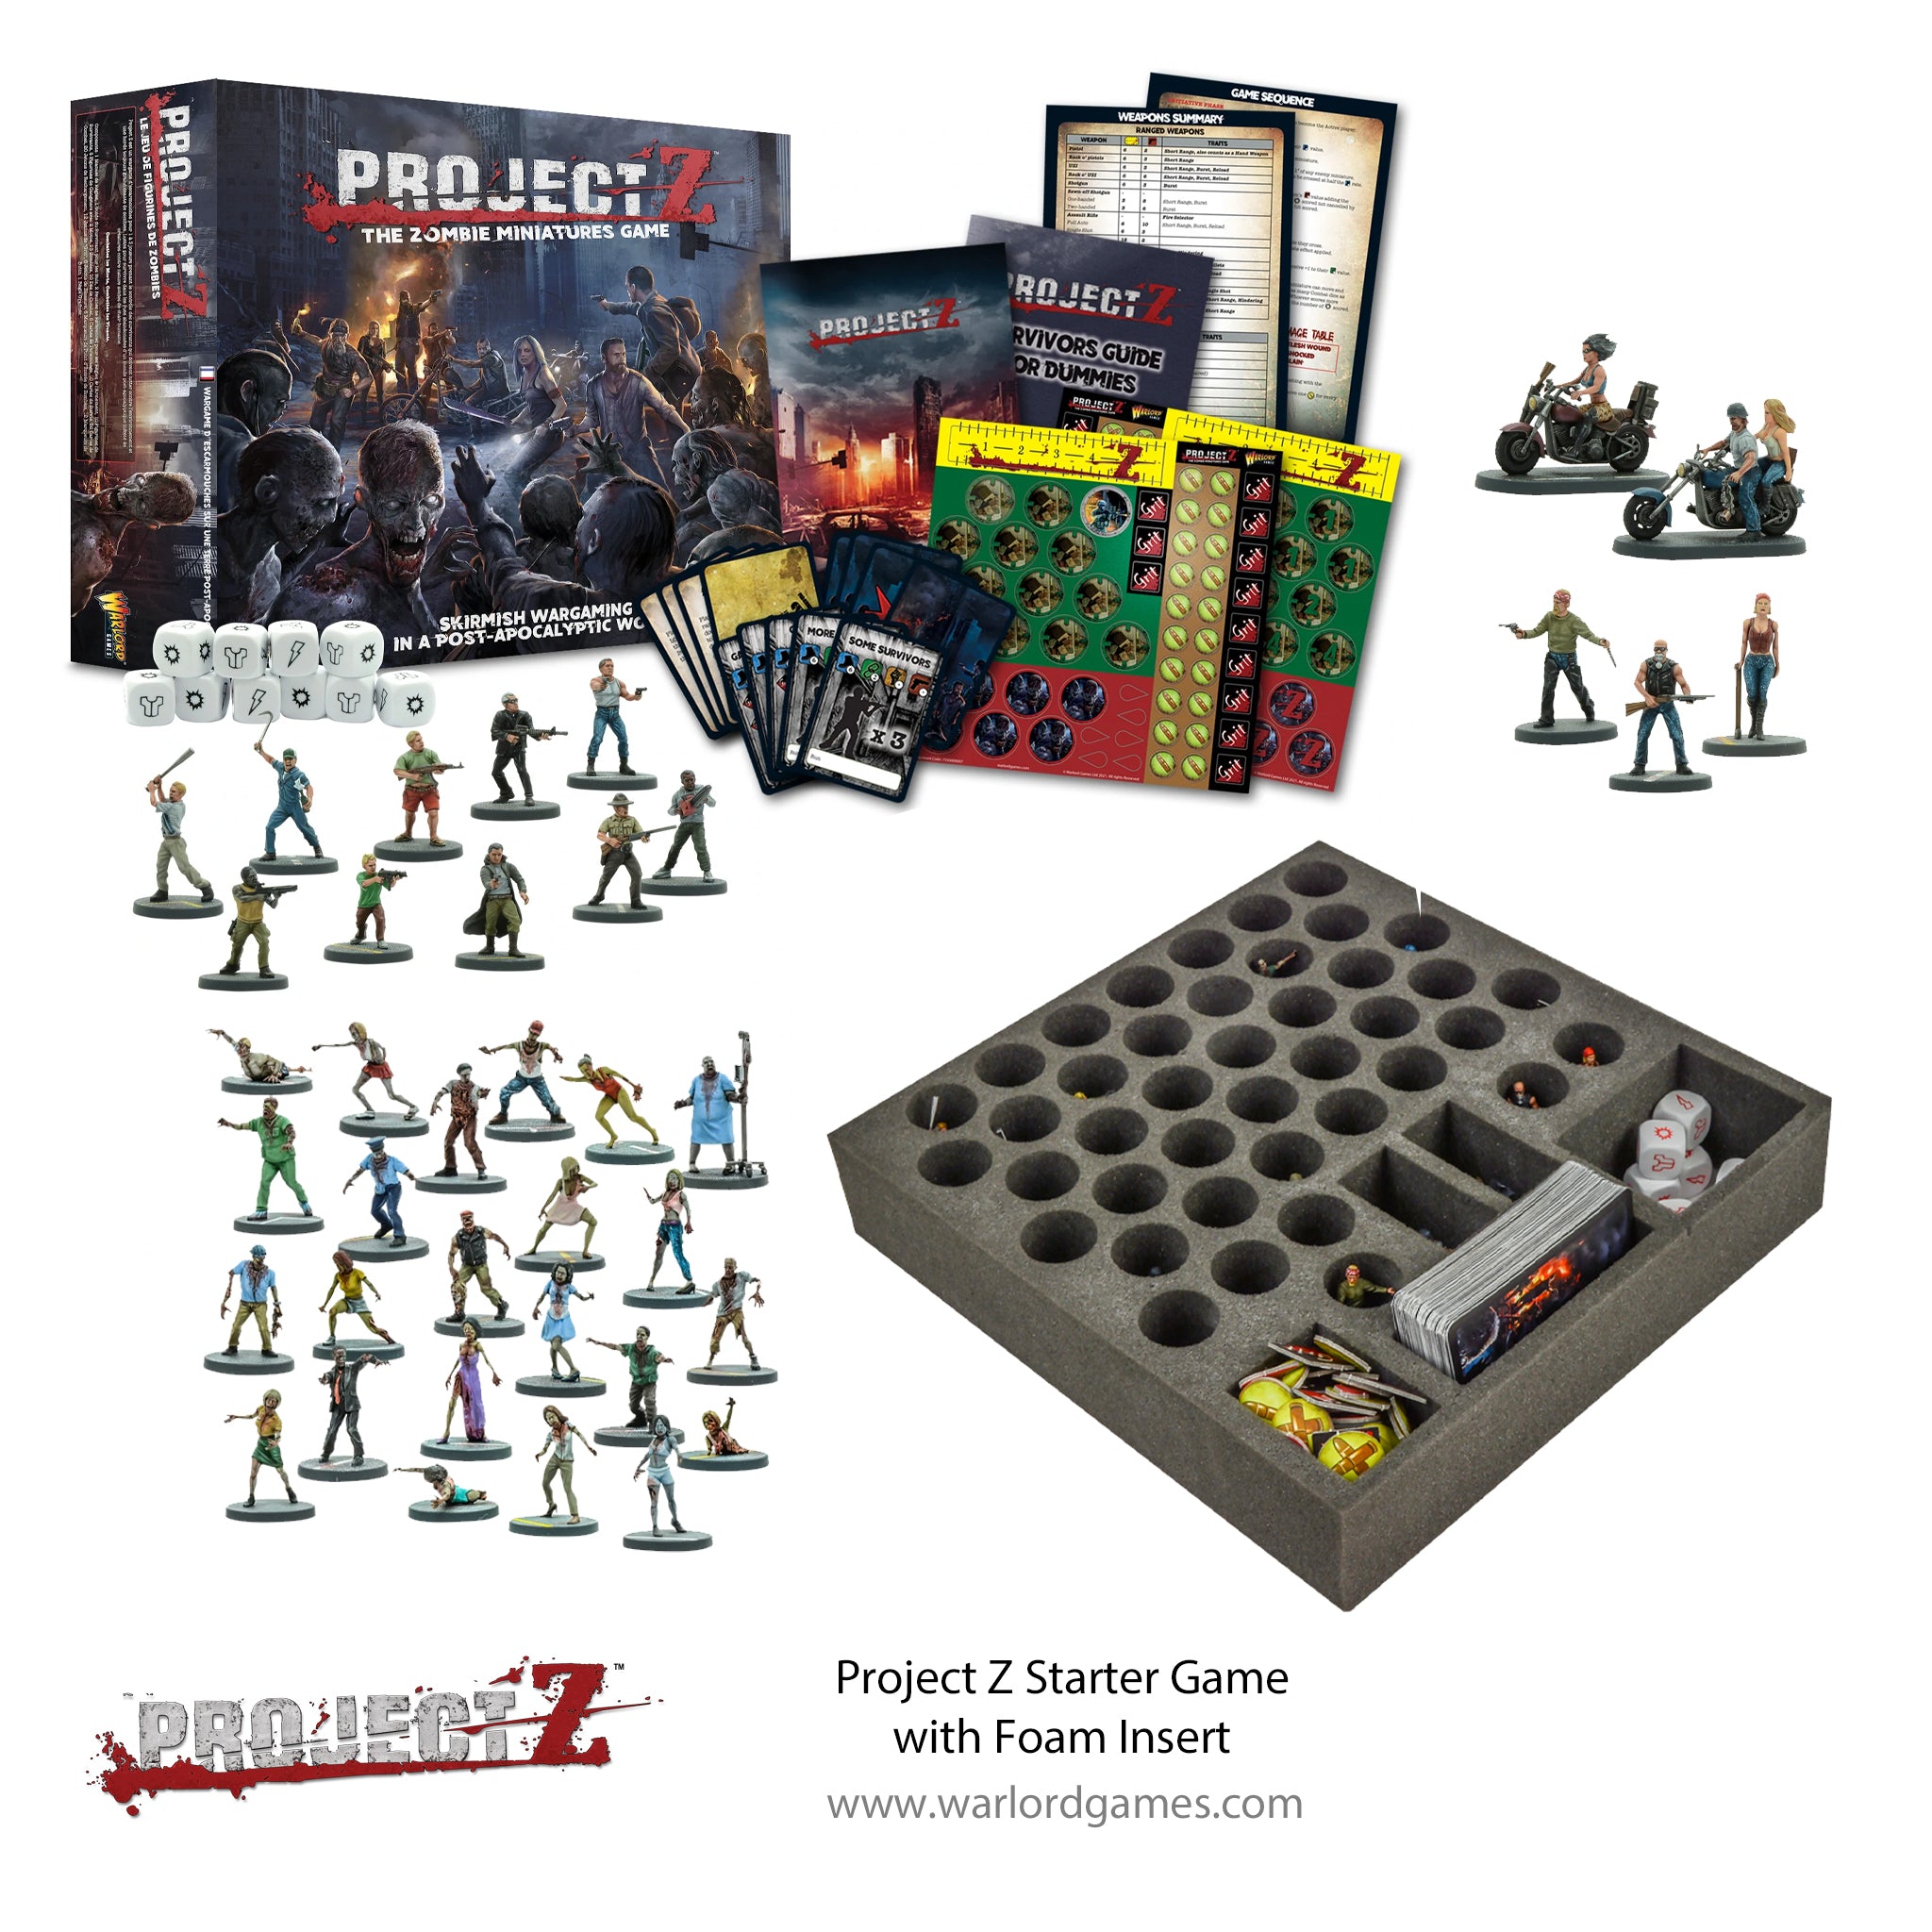 Project Z Starter Game With Foam Insert